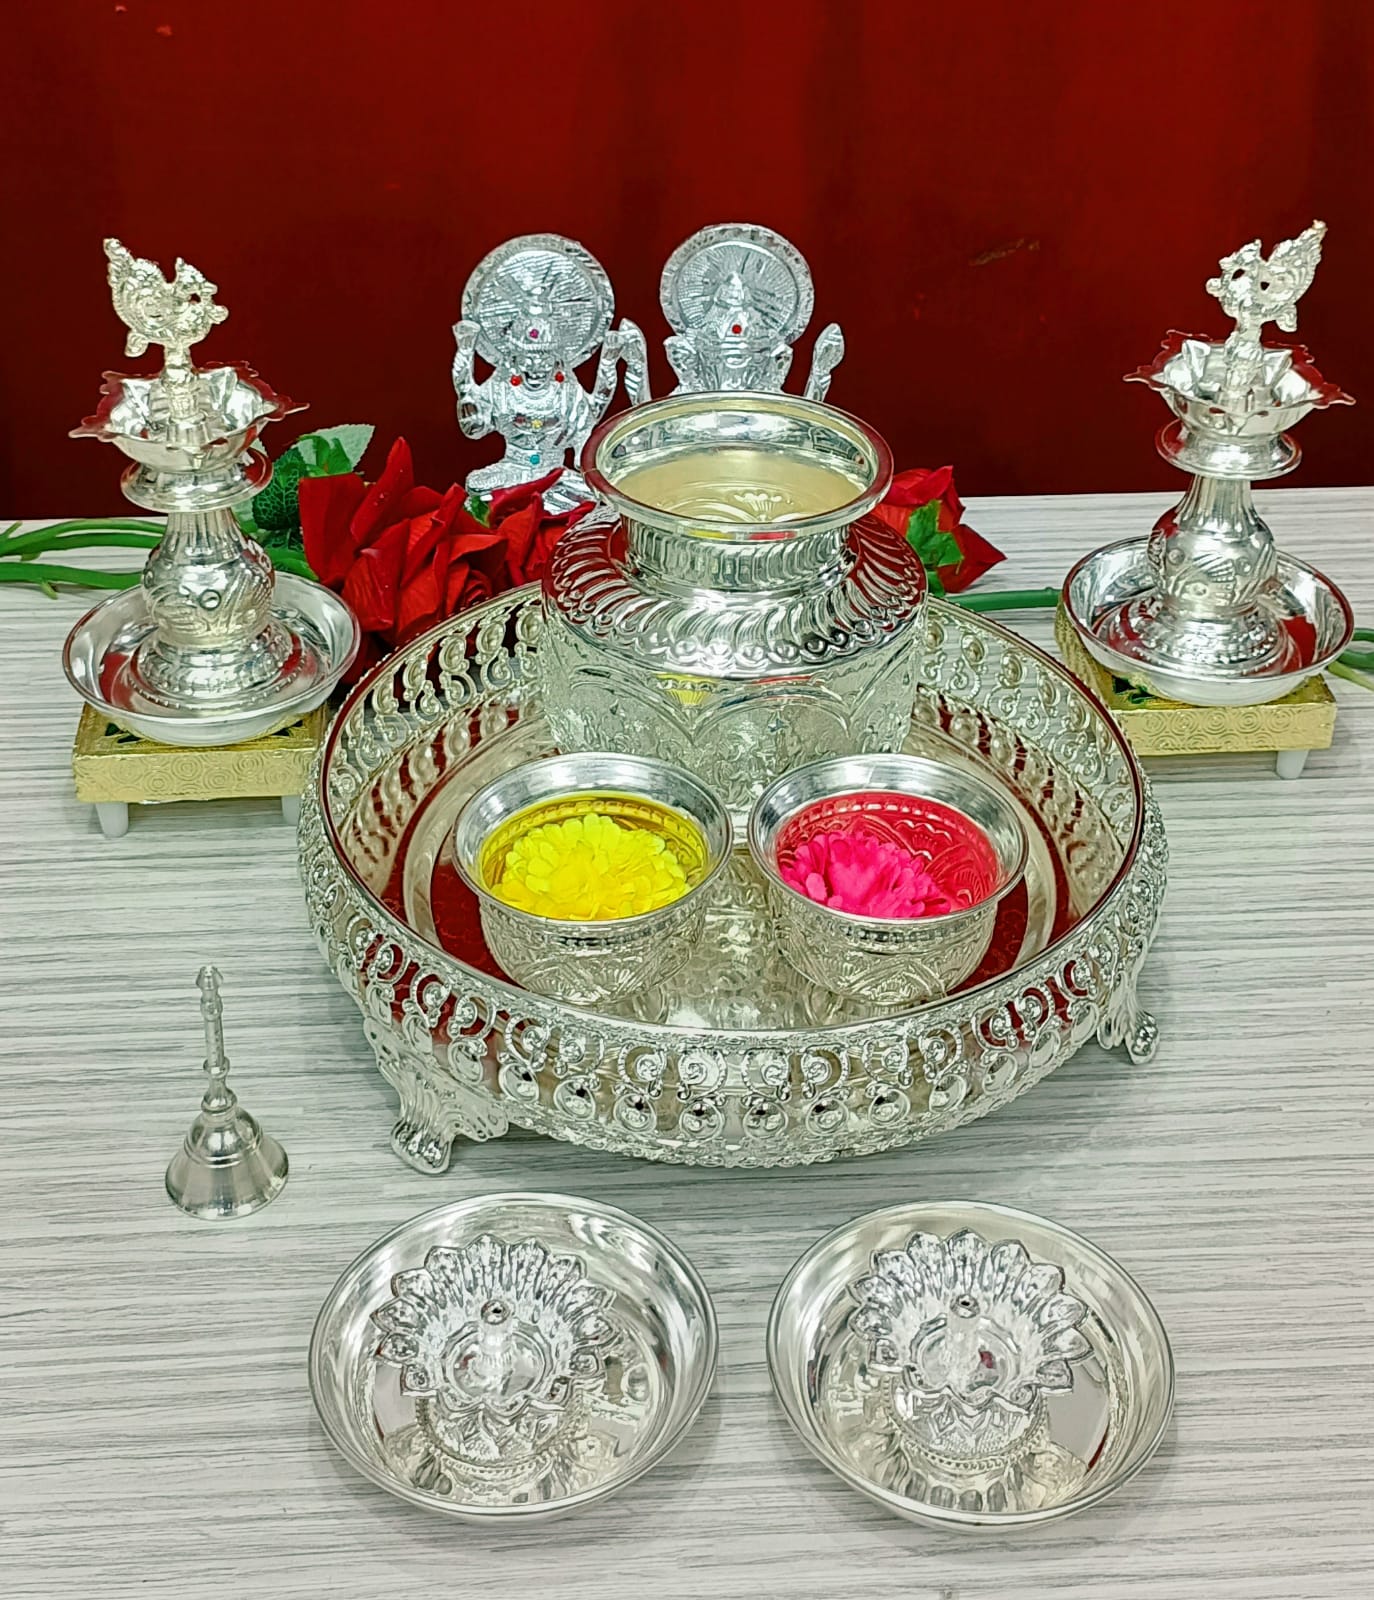 Exquisite Pooja Set with Mina Chowki | German Silver all in One Pooja Set